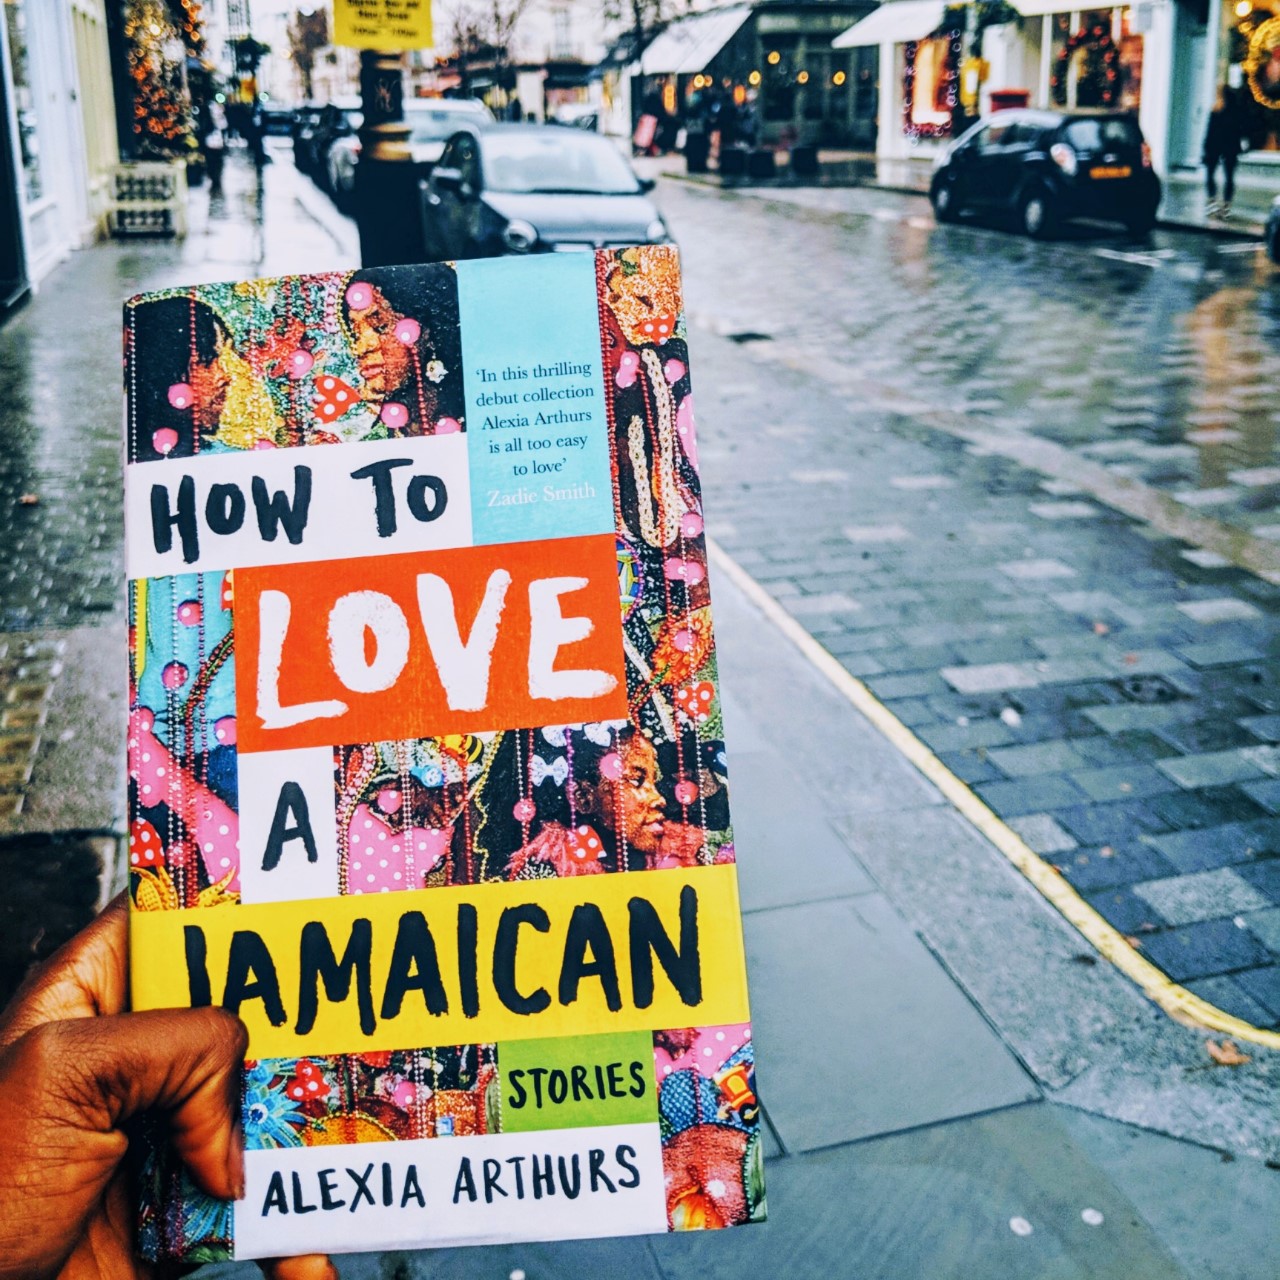 Back Ah Yard Box: How To Love a Jamaican Review